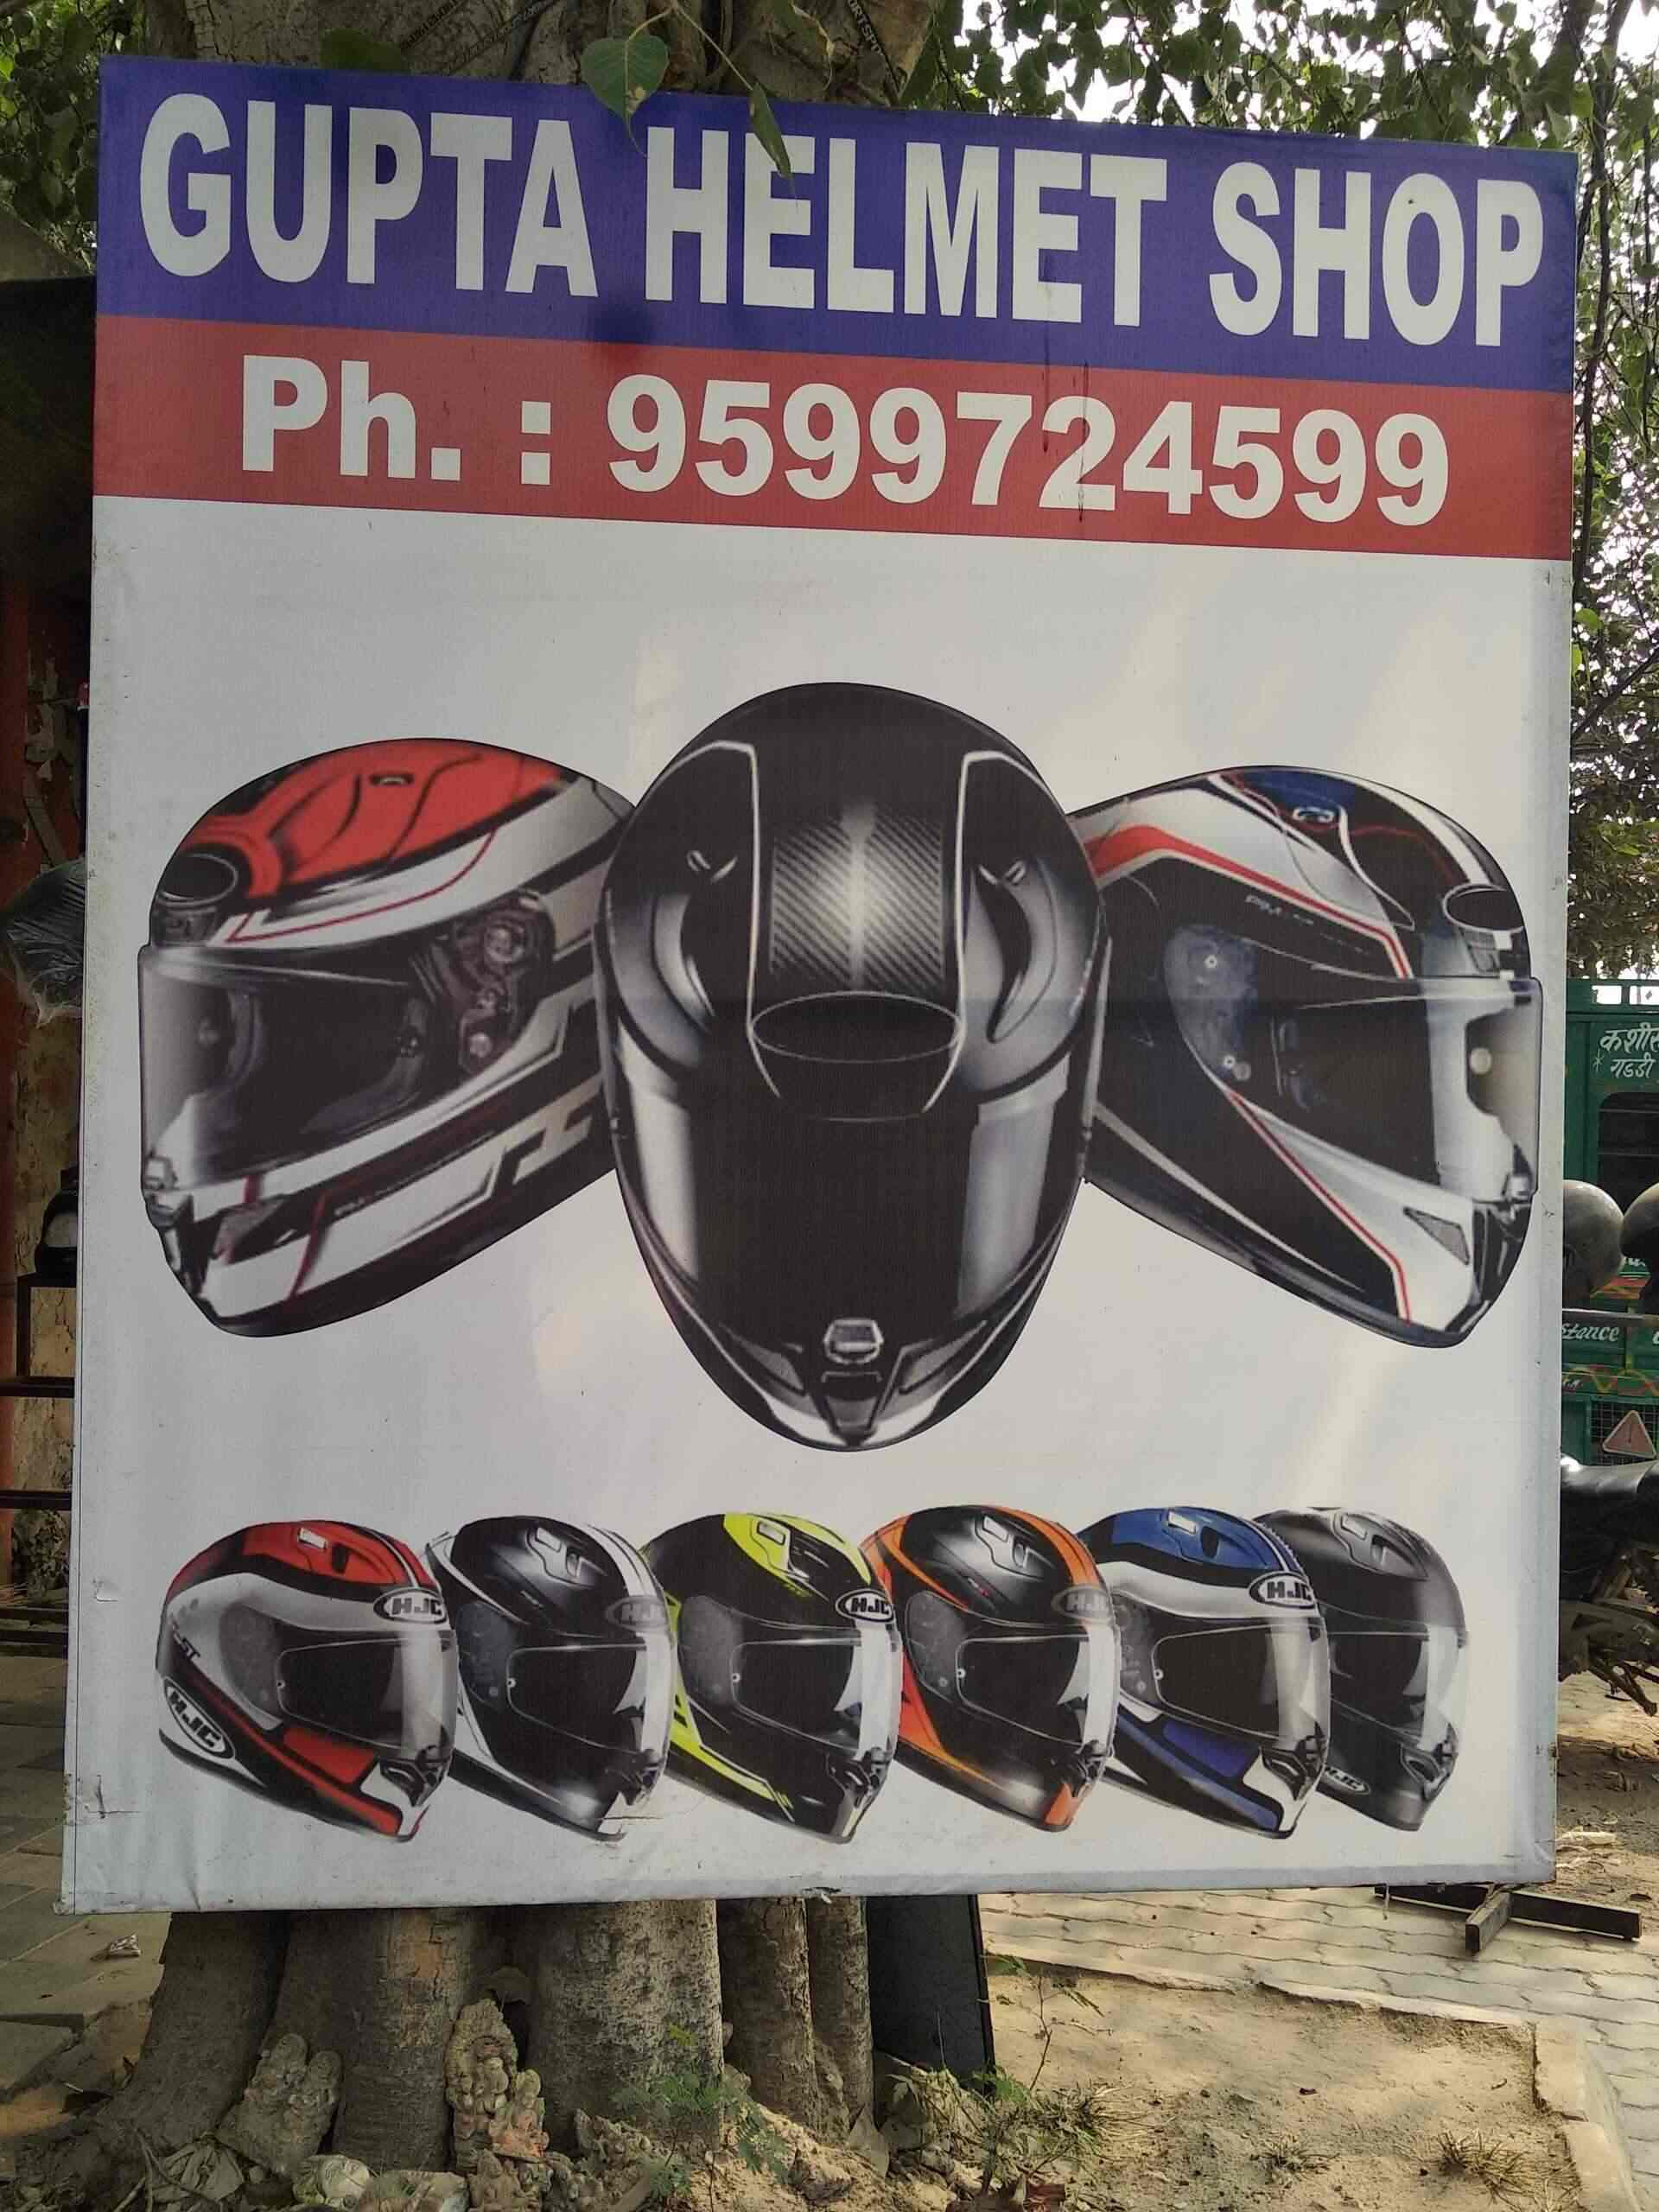 Motorcycle Helmet Bike You Must By No Means Make